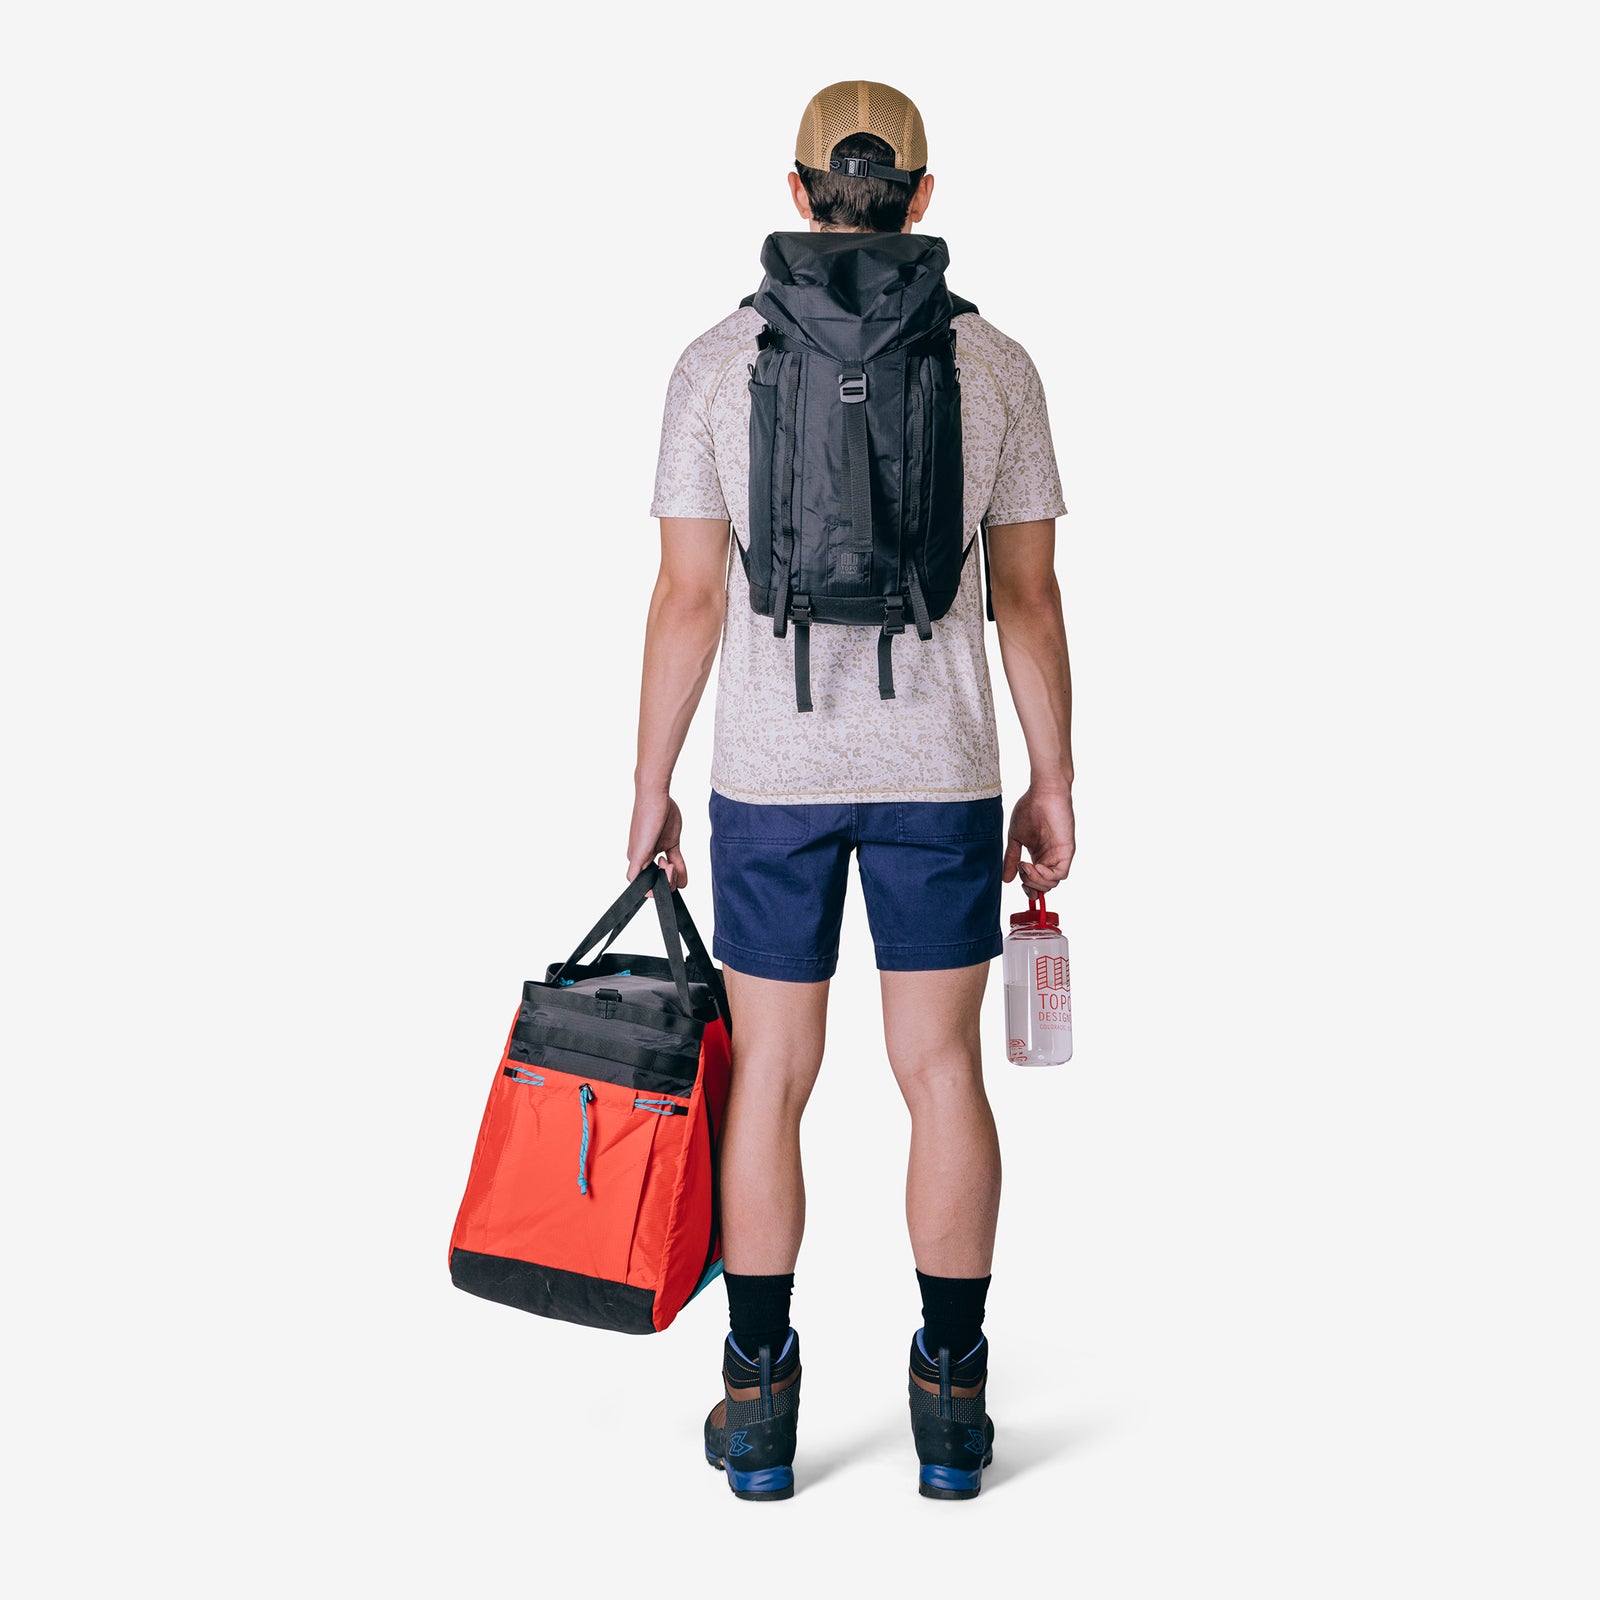 Back model shot of Topo Designs Mountain Pack 16L hiking backpack with internal laptop sleeve in lightweight recycled nylon "black".